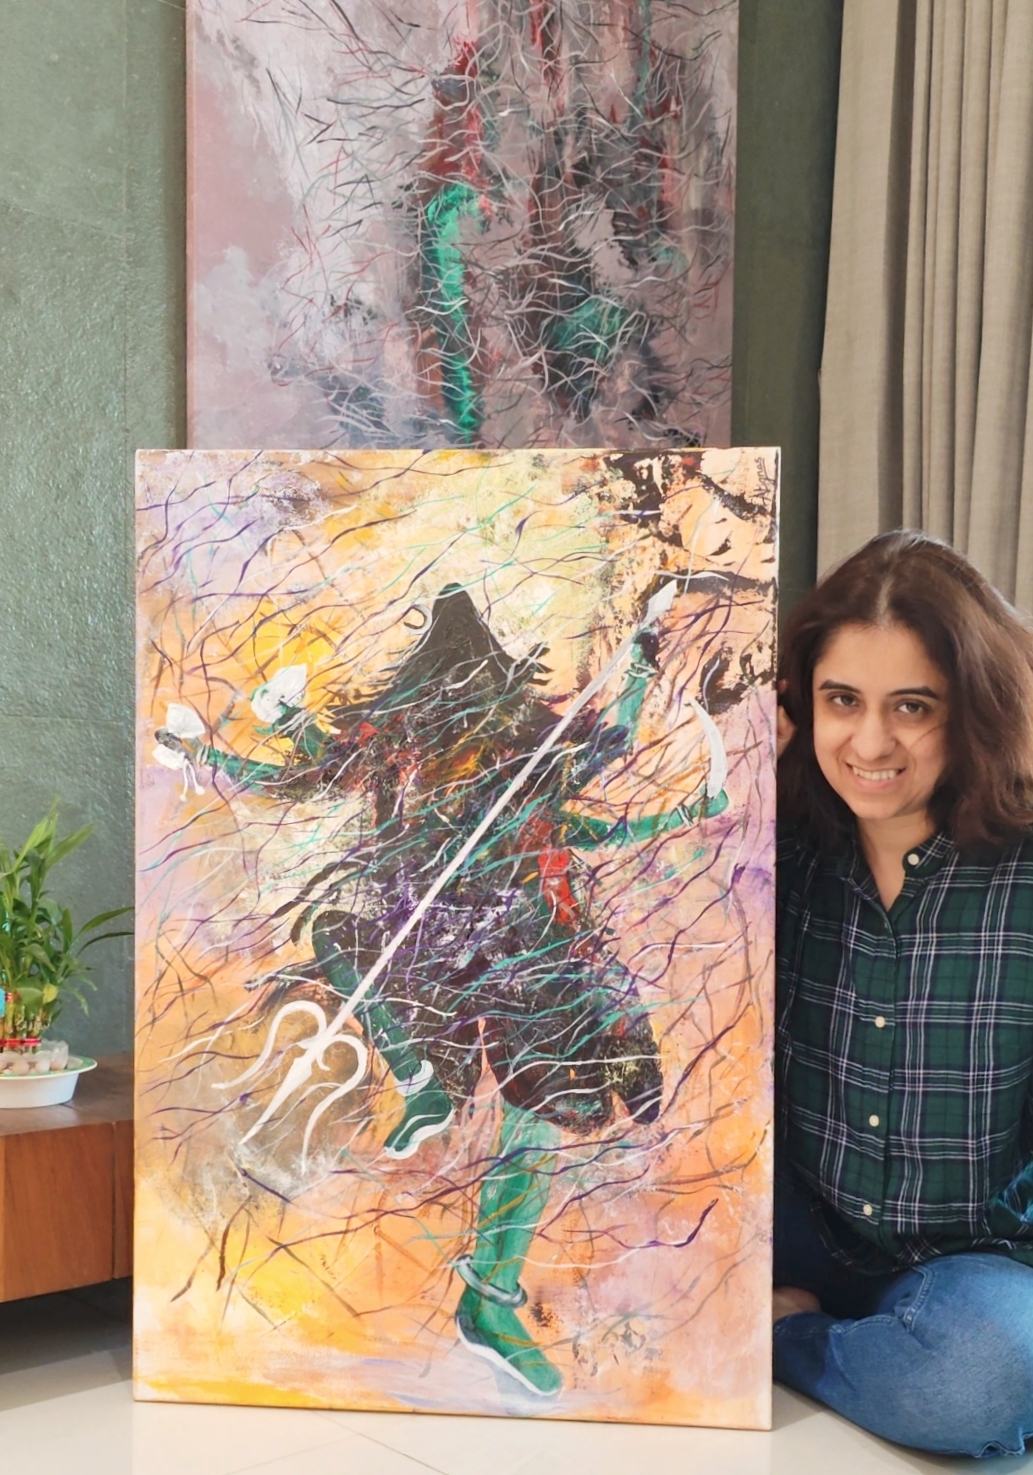 My most modern painting “The Dance of Shiva” on canvas is on its technique to new dwelling. I’m favorable uncommon to seize if getting art work framed is a mission must you win art work in roll, as logistics price will get very high when sending a framed one.